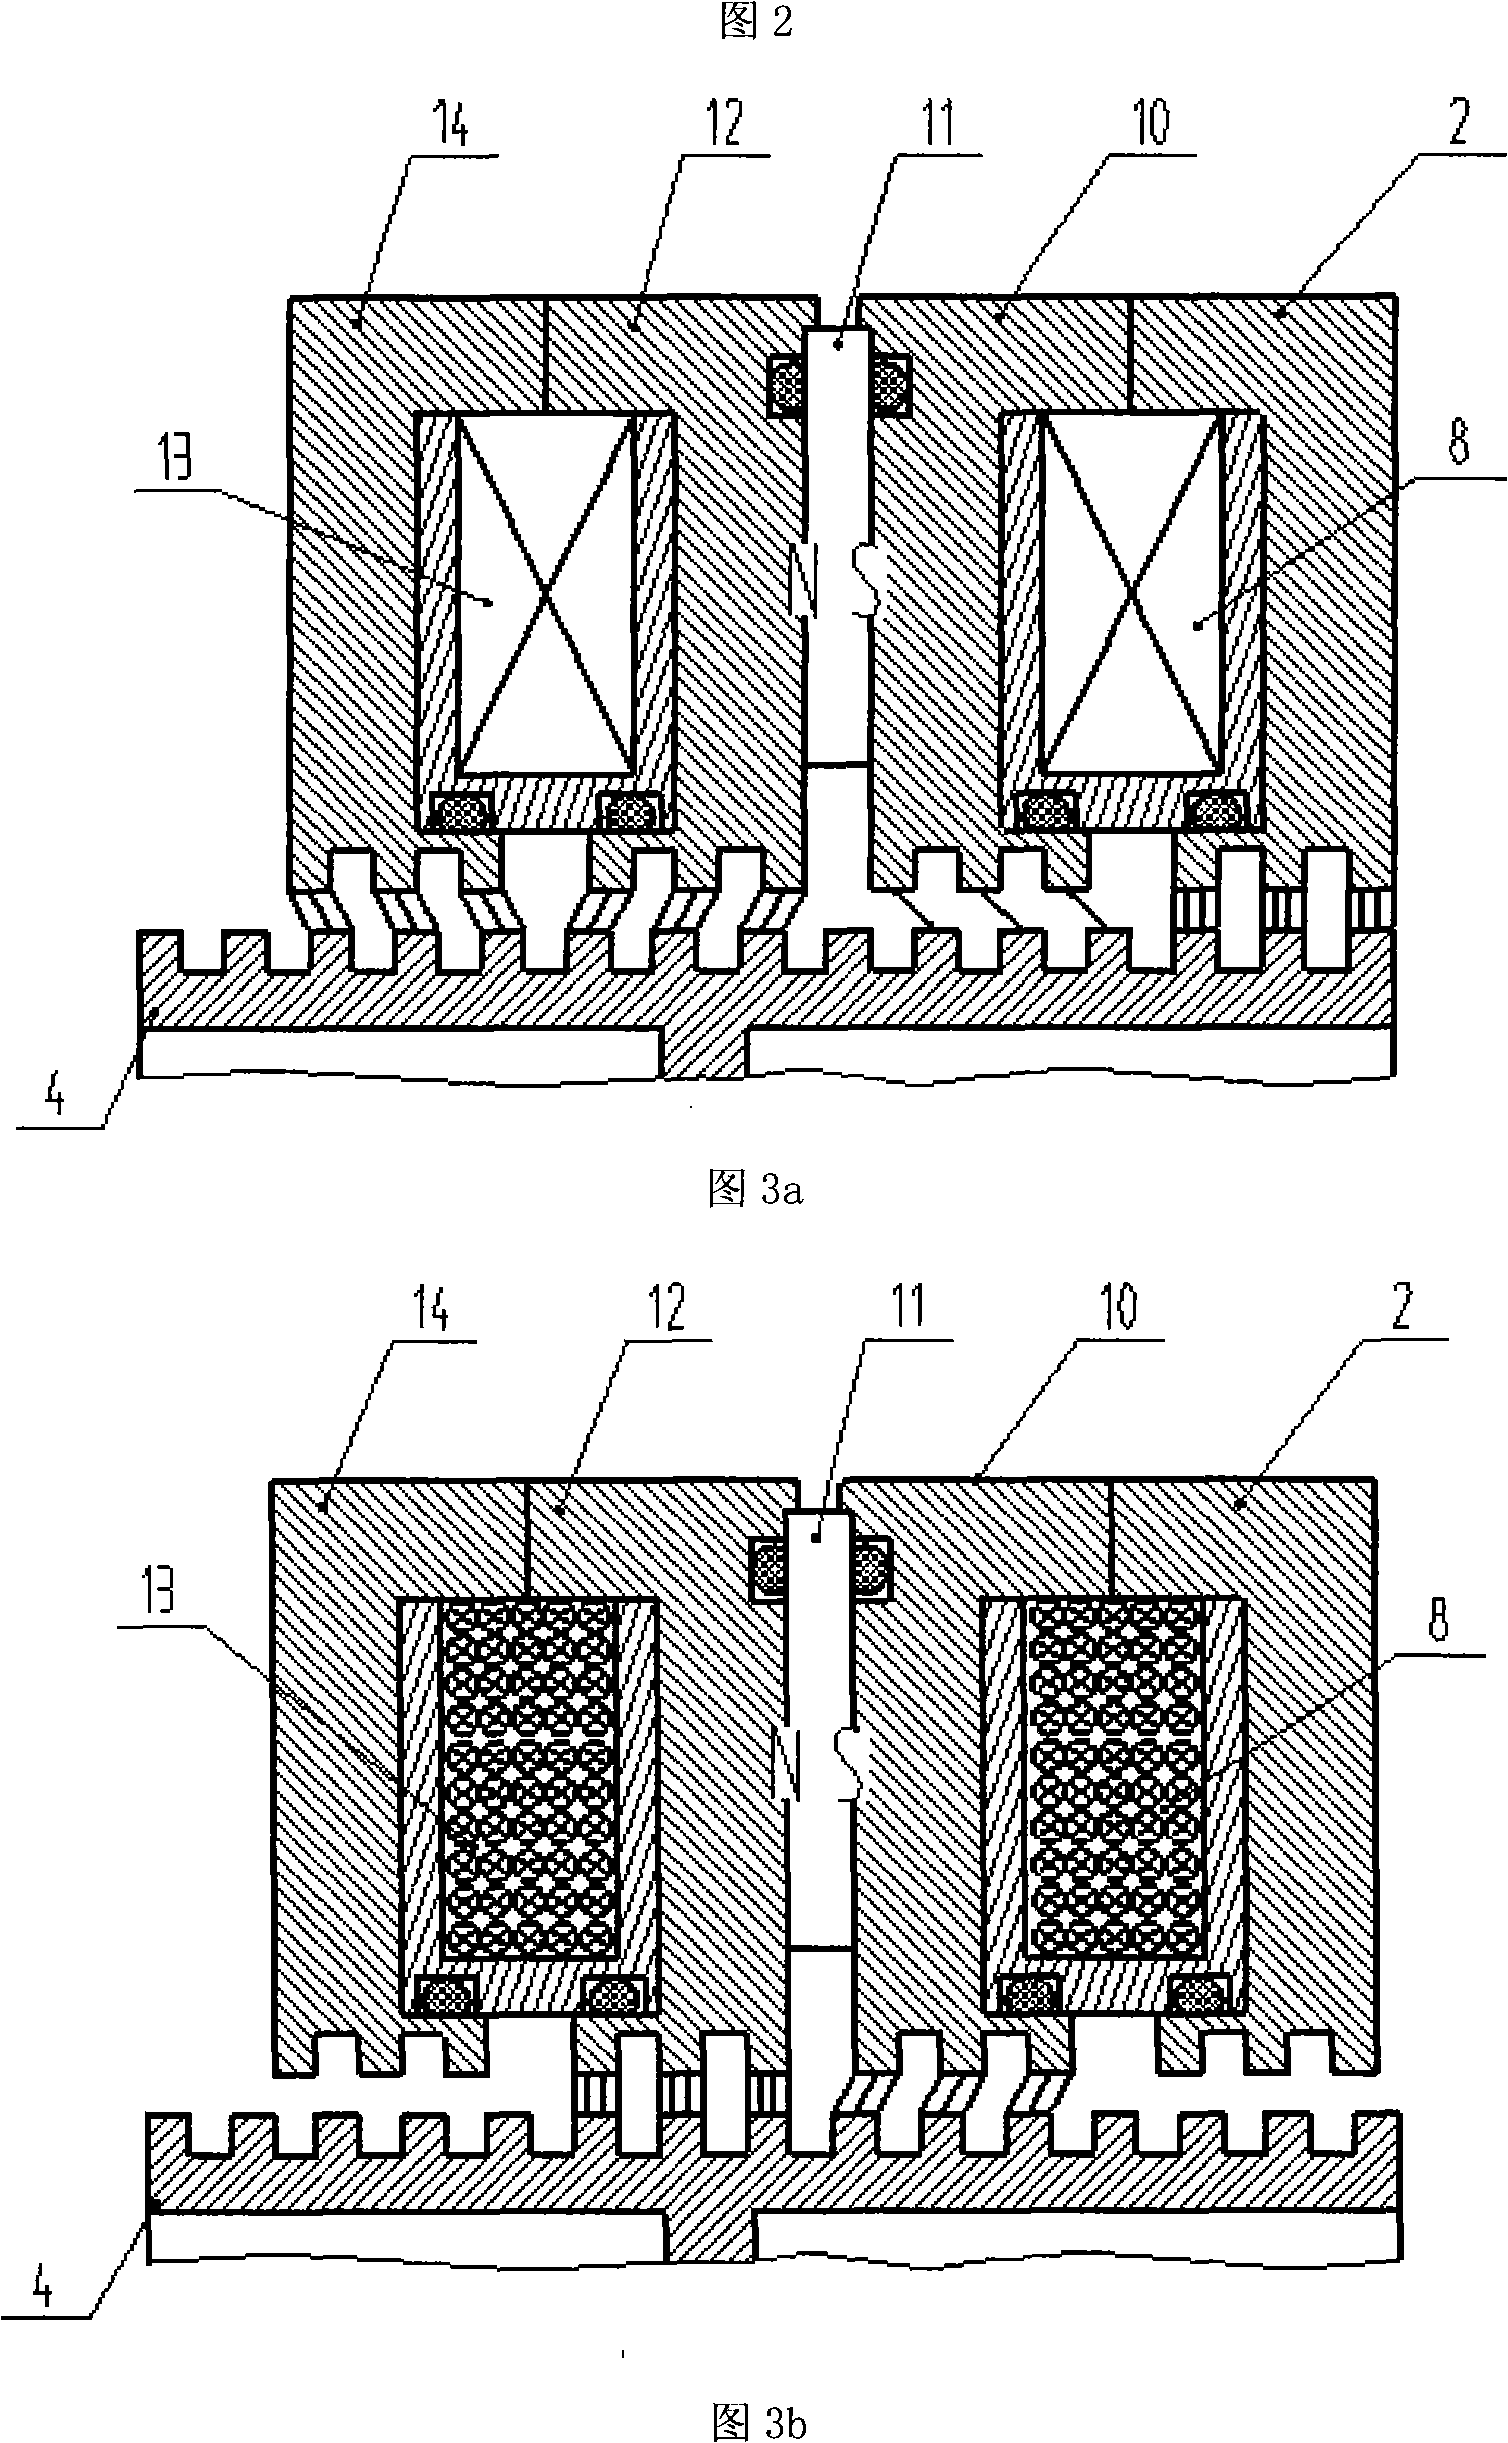 High pressure resistant low-inertia direct-operated electro-mechanical conversion device